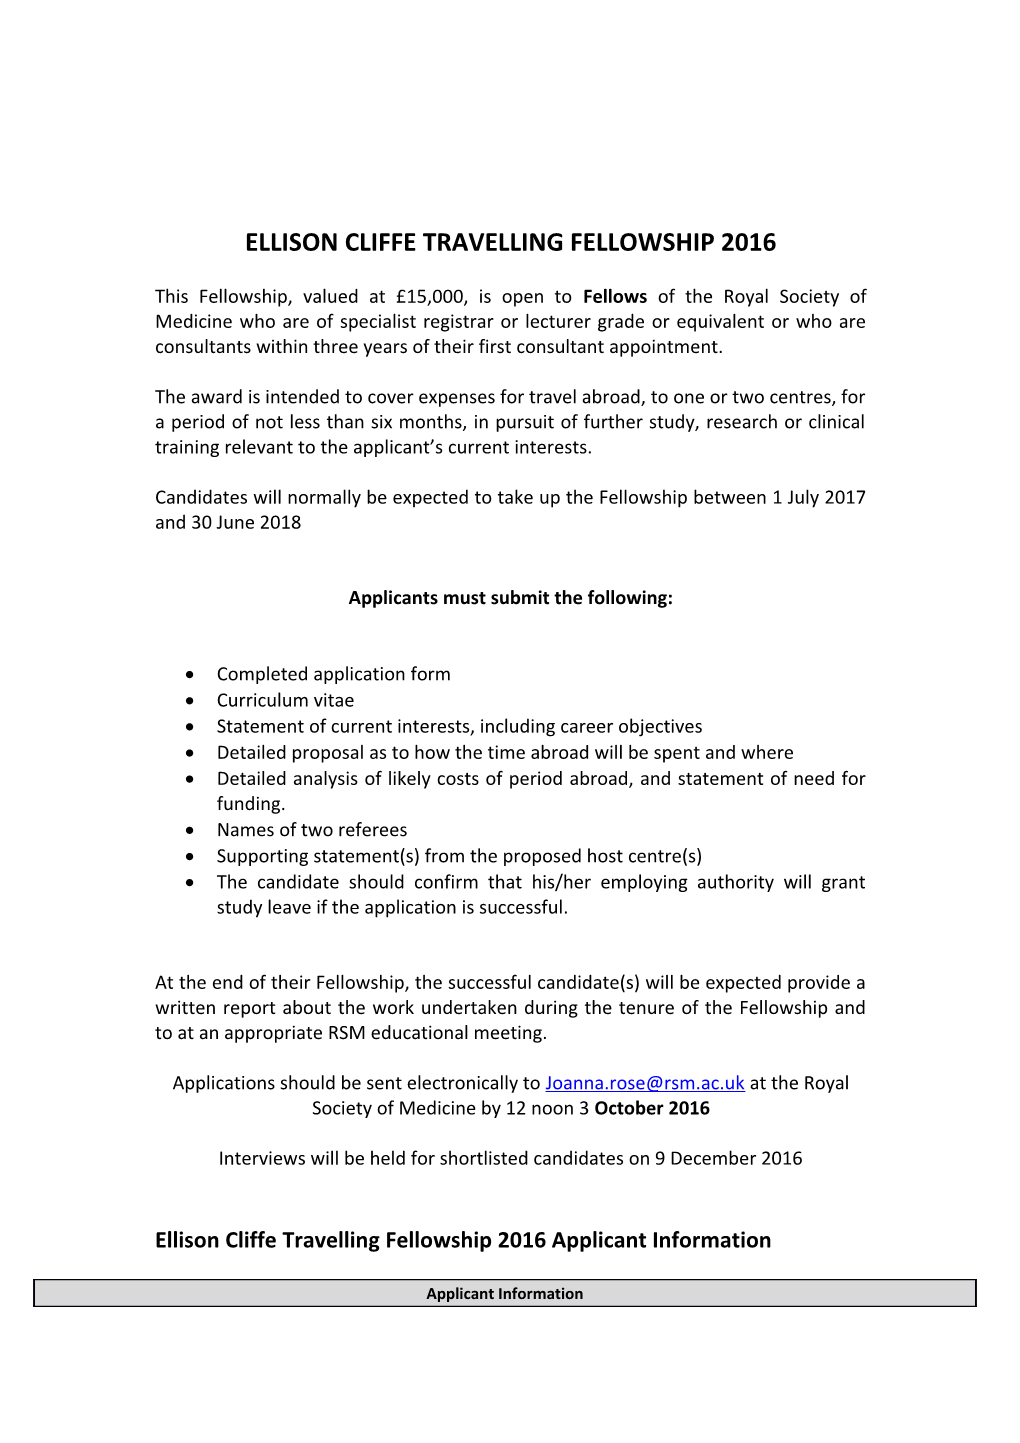 The Ellison-Cliffe Travelling Fellowship